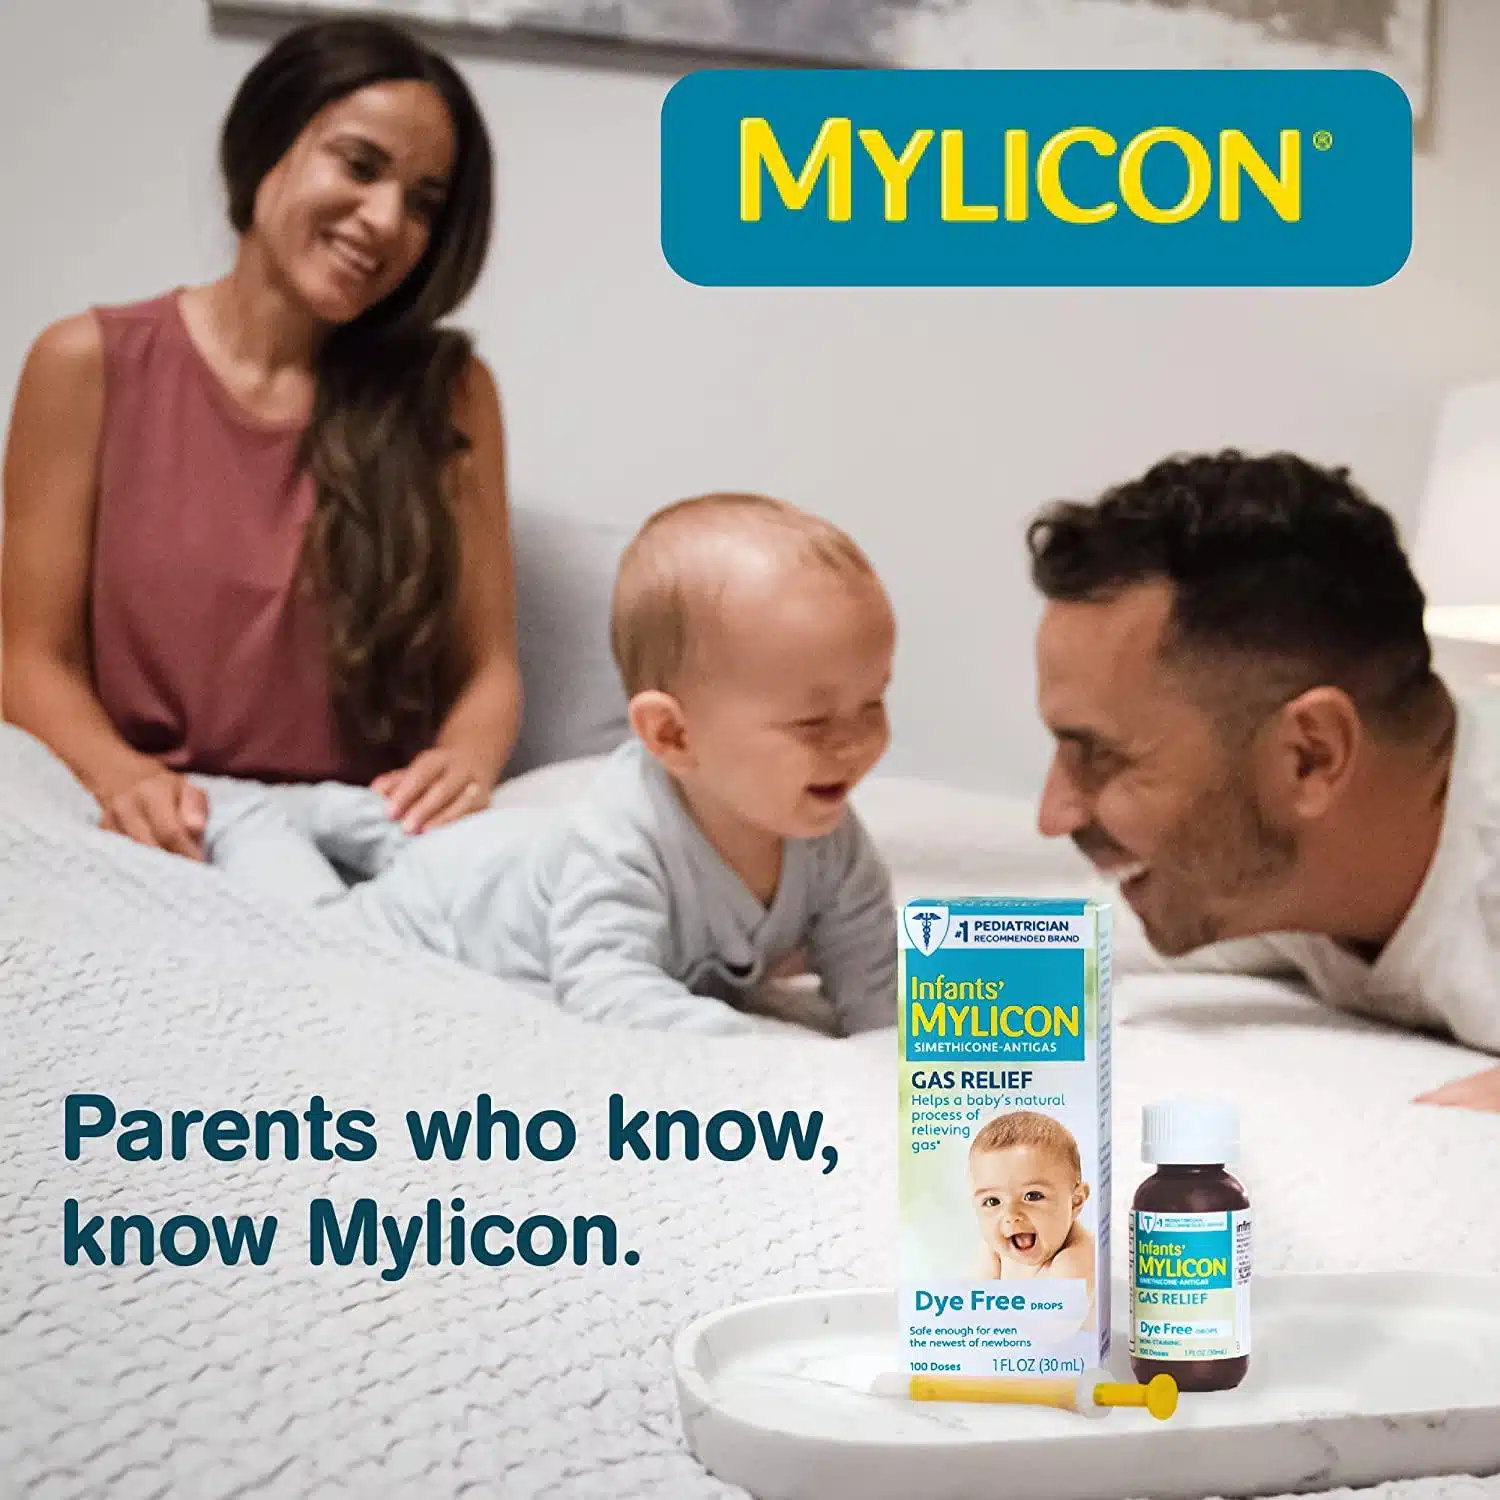 How Fast Does Mylicon Work?